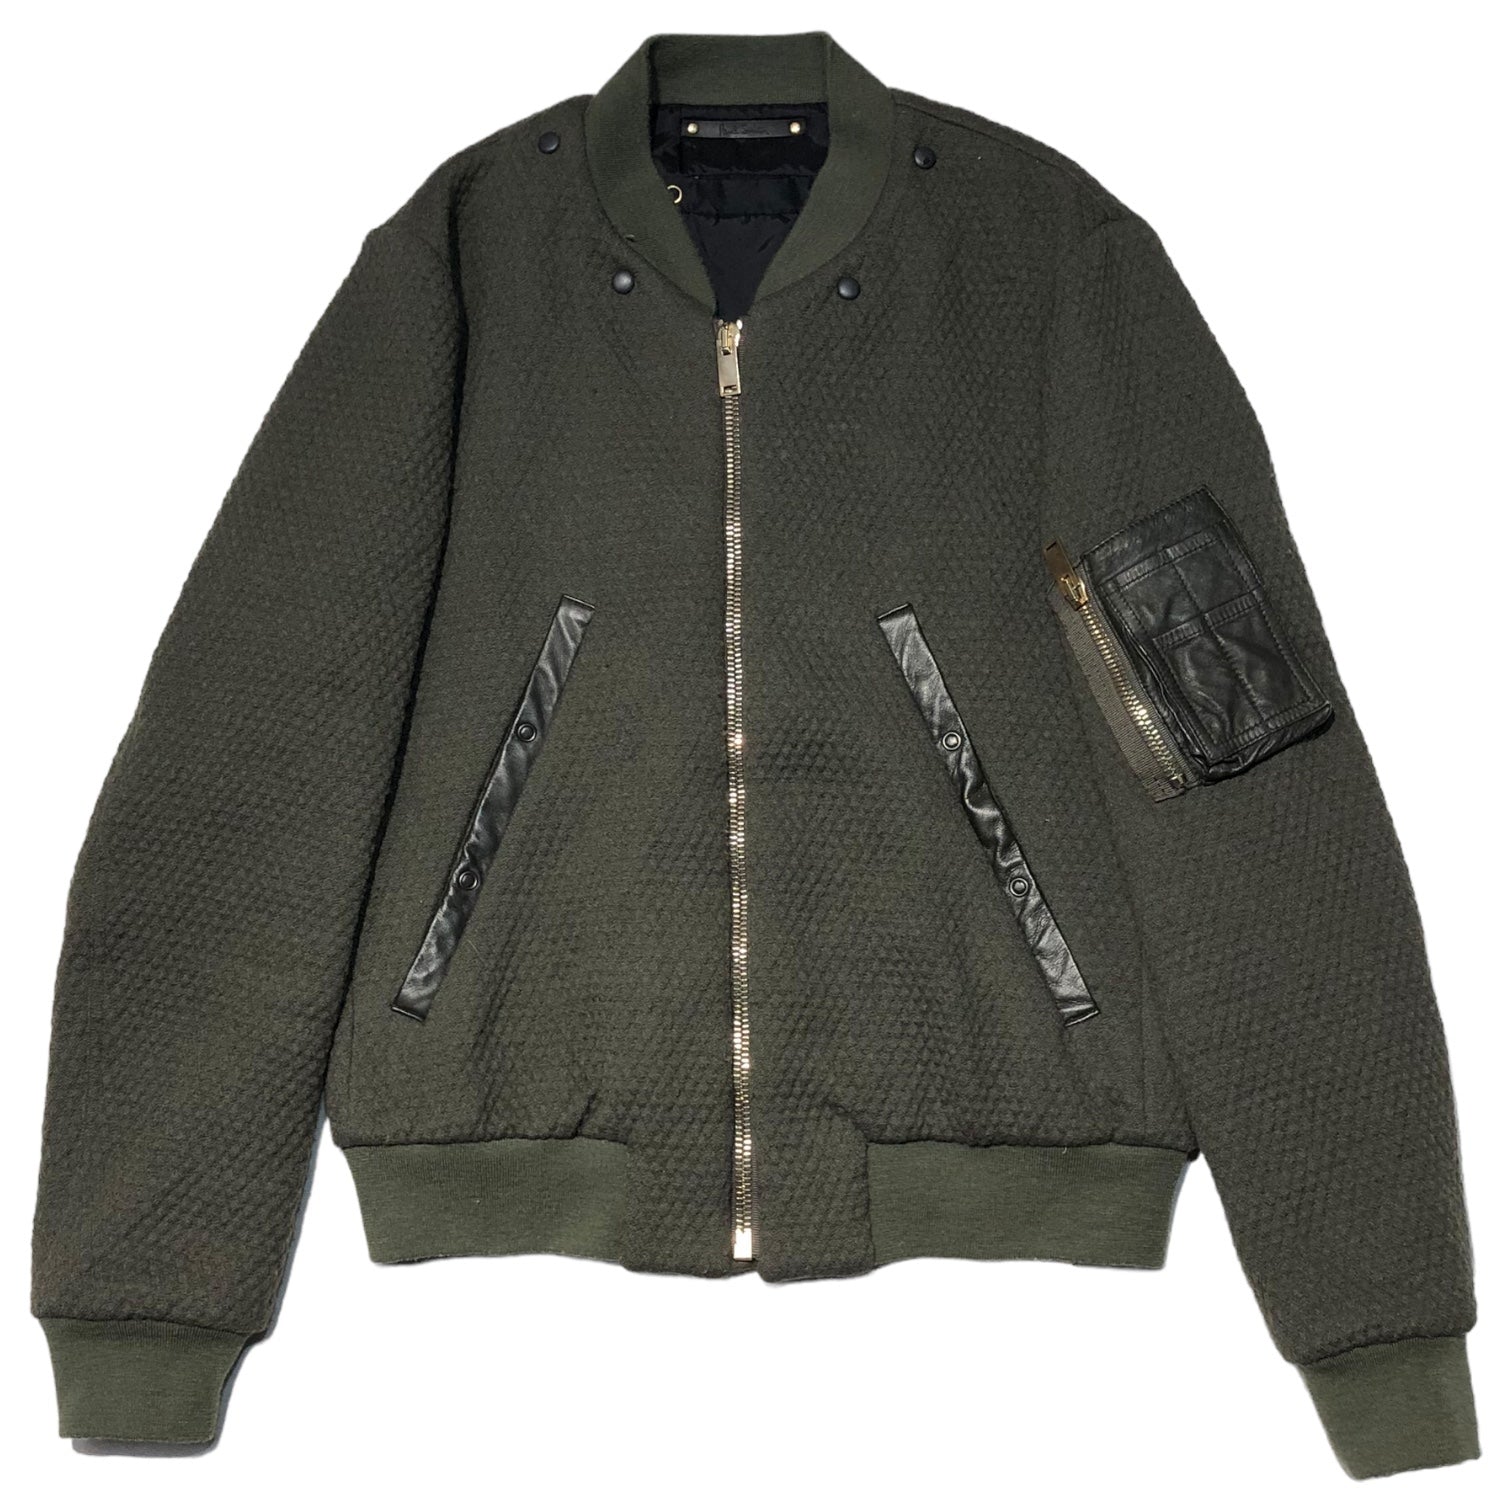 PAUL SMITH(ポールスミス) 15AW MA-1 with liner フライト ジャケット ...